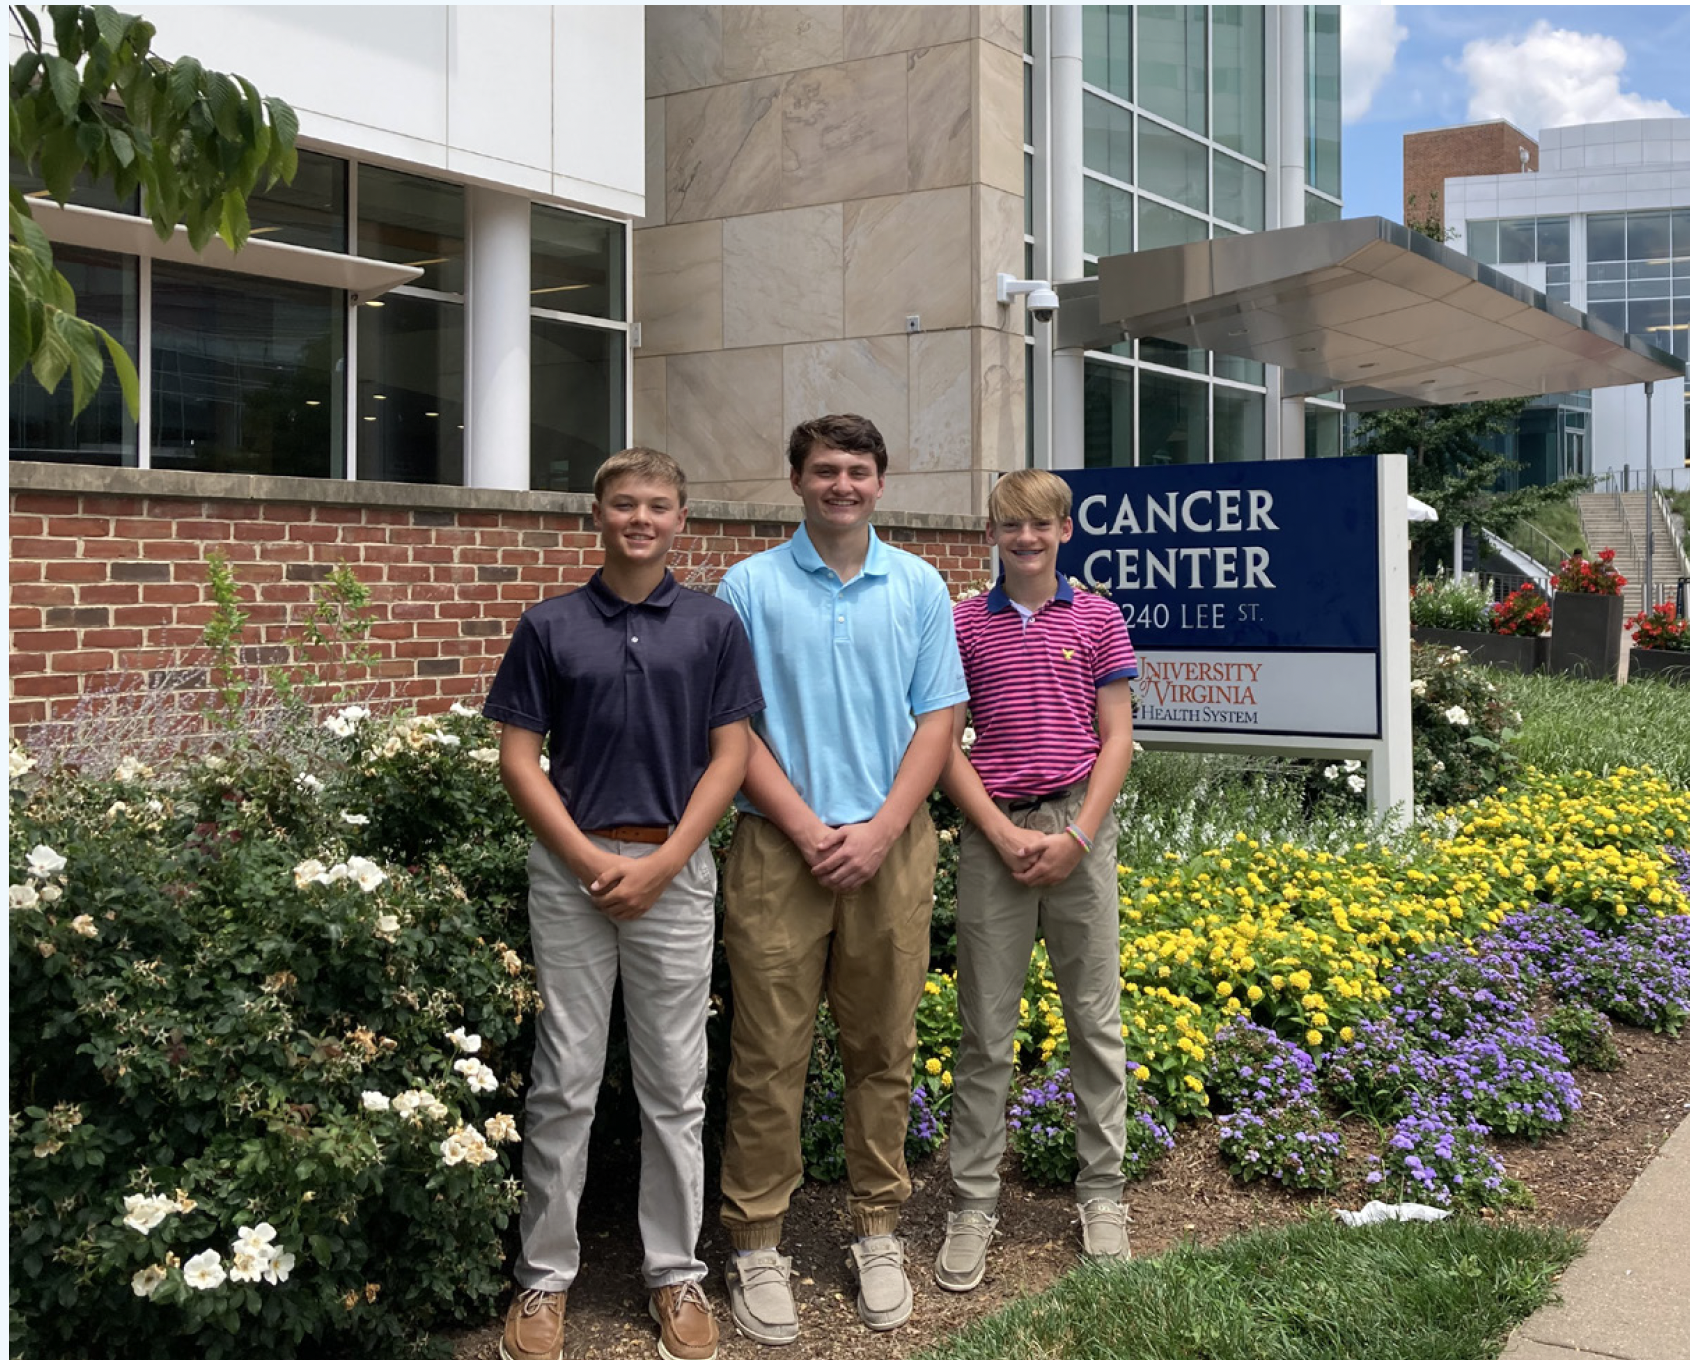 The three boys stand outside the UVA Cancer Center